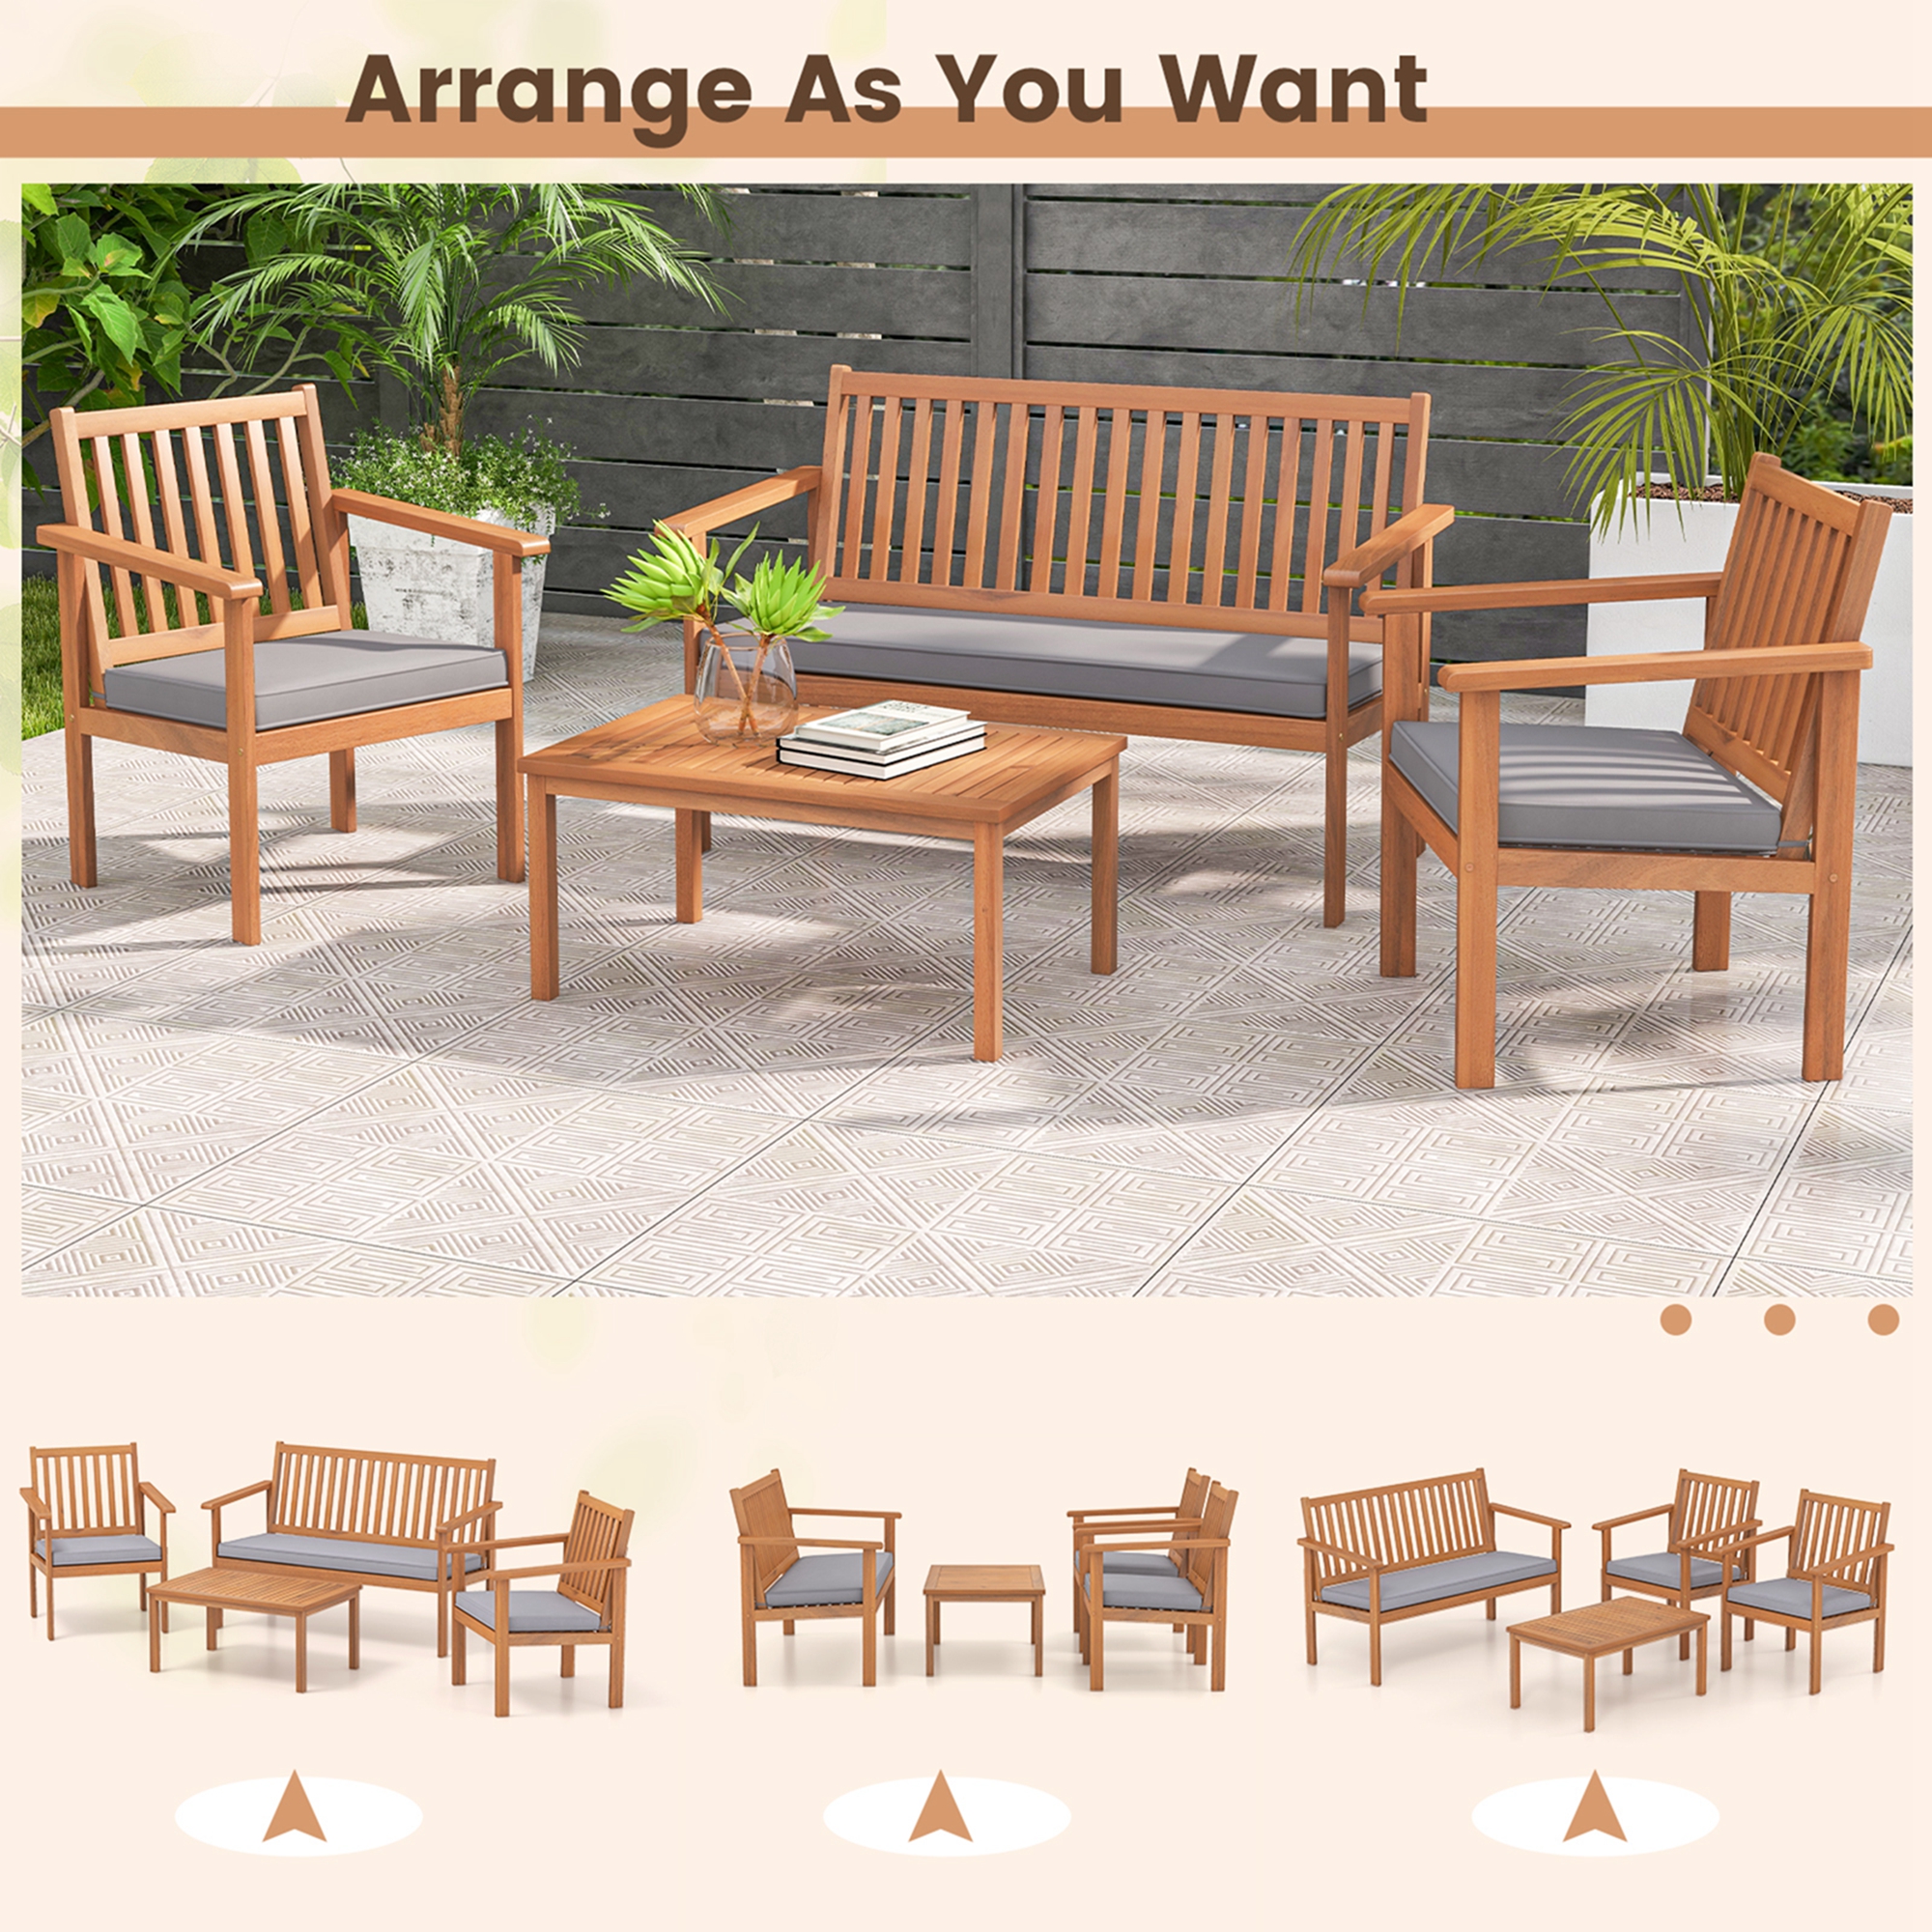 Costway 4 PCS Patio Wood Furniture Set with Loveseat, 2 Chairs & Coffee Table for Porch Grey - image 5 of 10